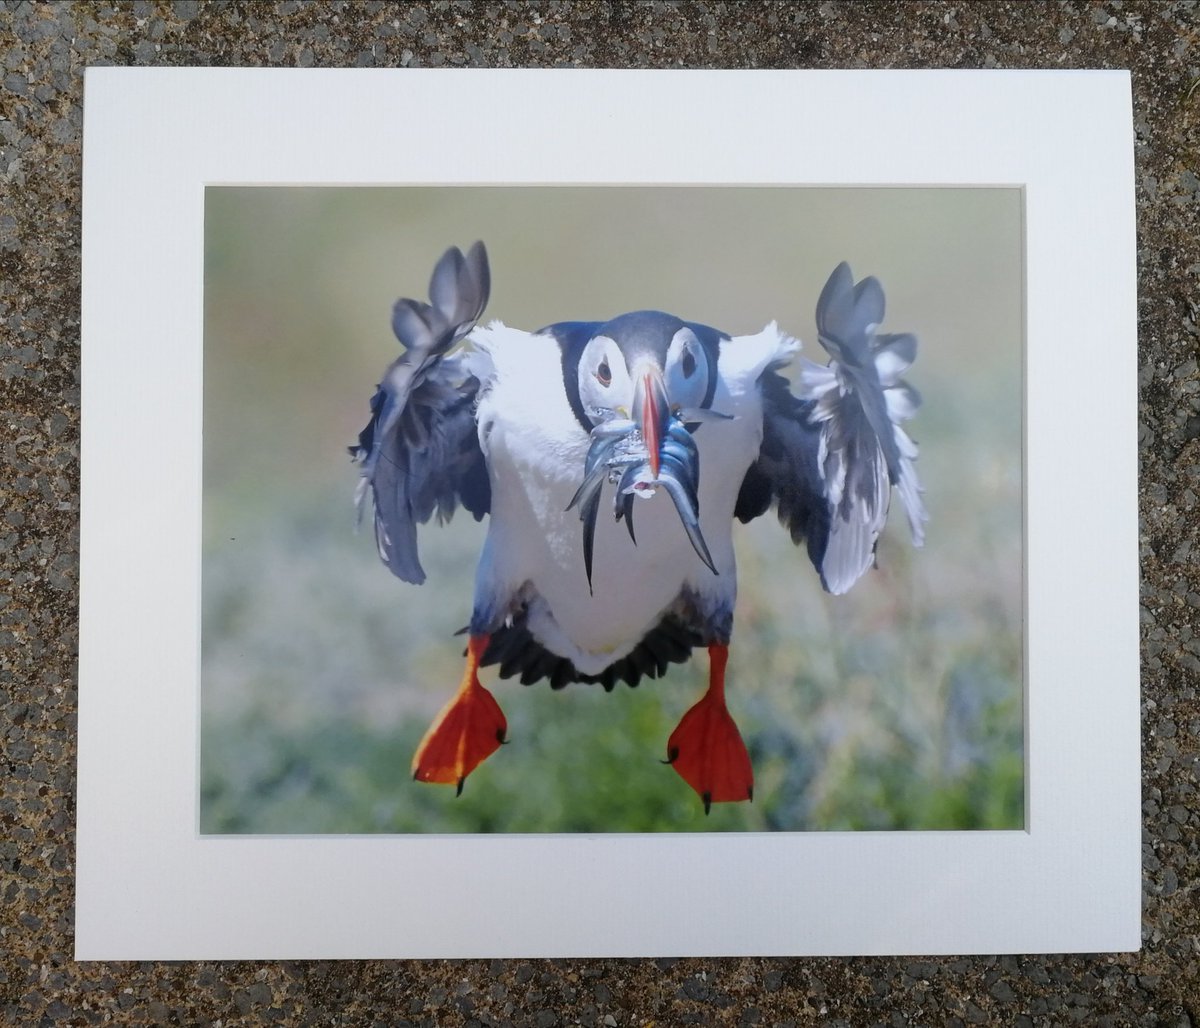 'Incoming Puffin' 10x8 mounted print.  Had to include my profile pic in my collection!  You can buy it here; https://www.carlbovis.com/product-page/incoming-puffin-10x8-mounted-print 